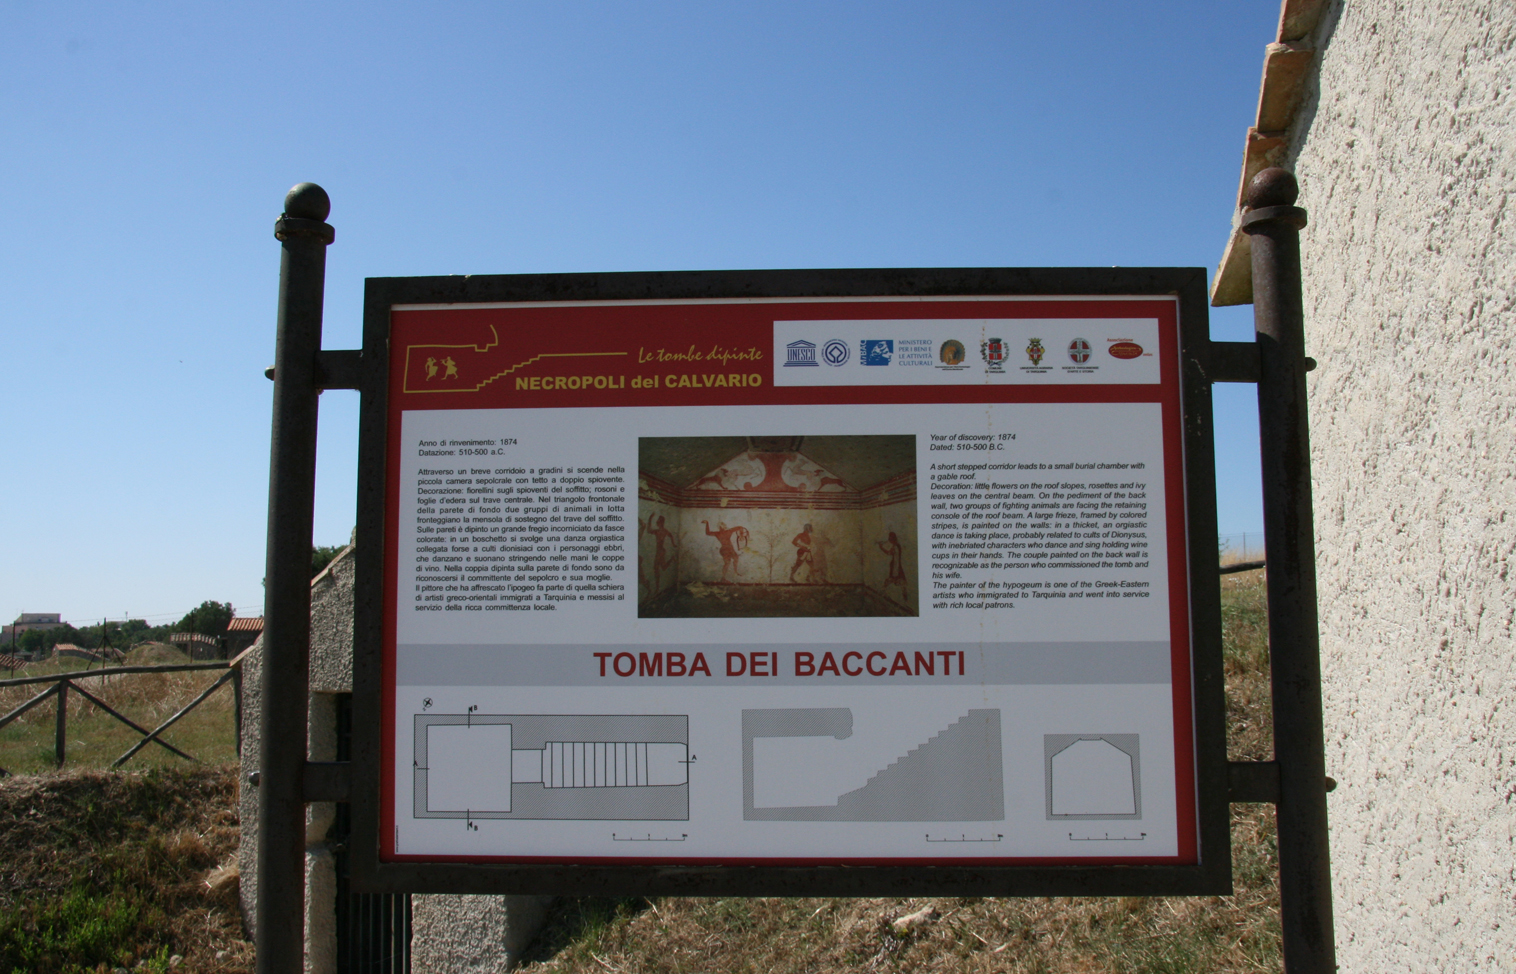 Informative sign at the Tomba dei Baccanti.